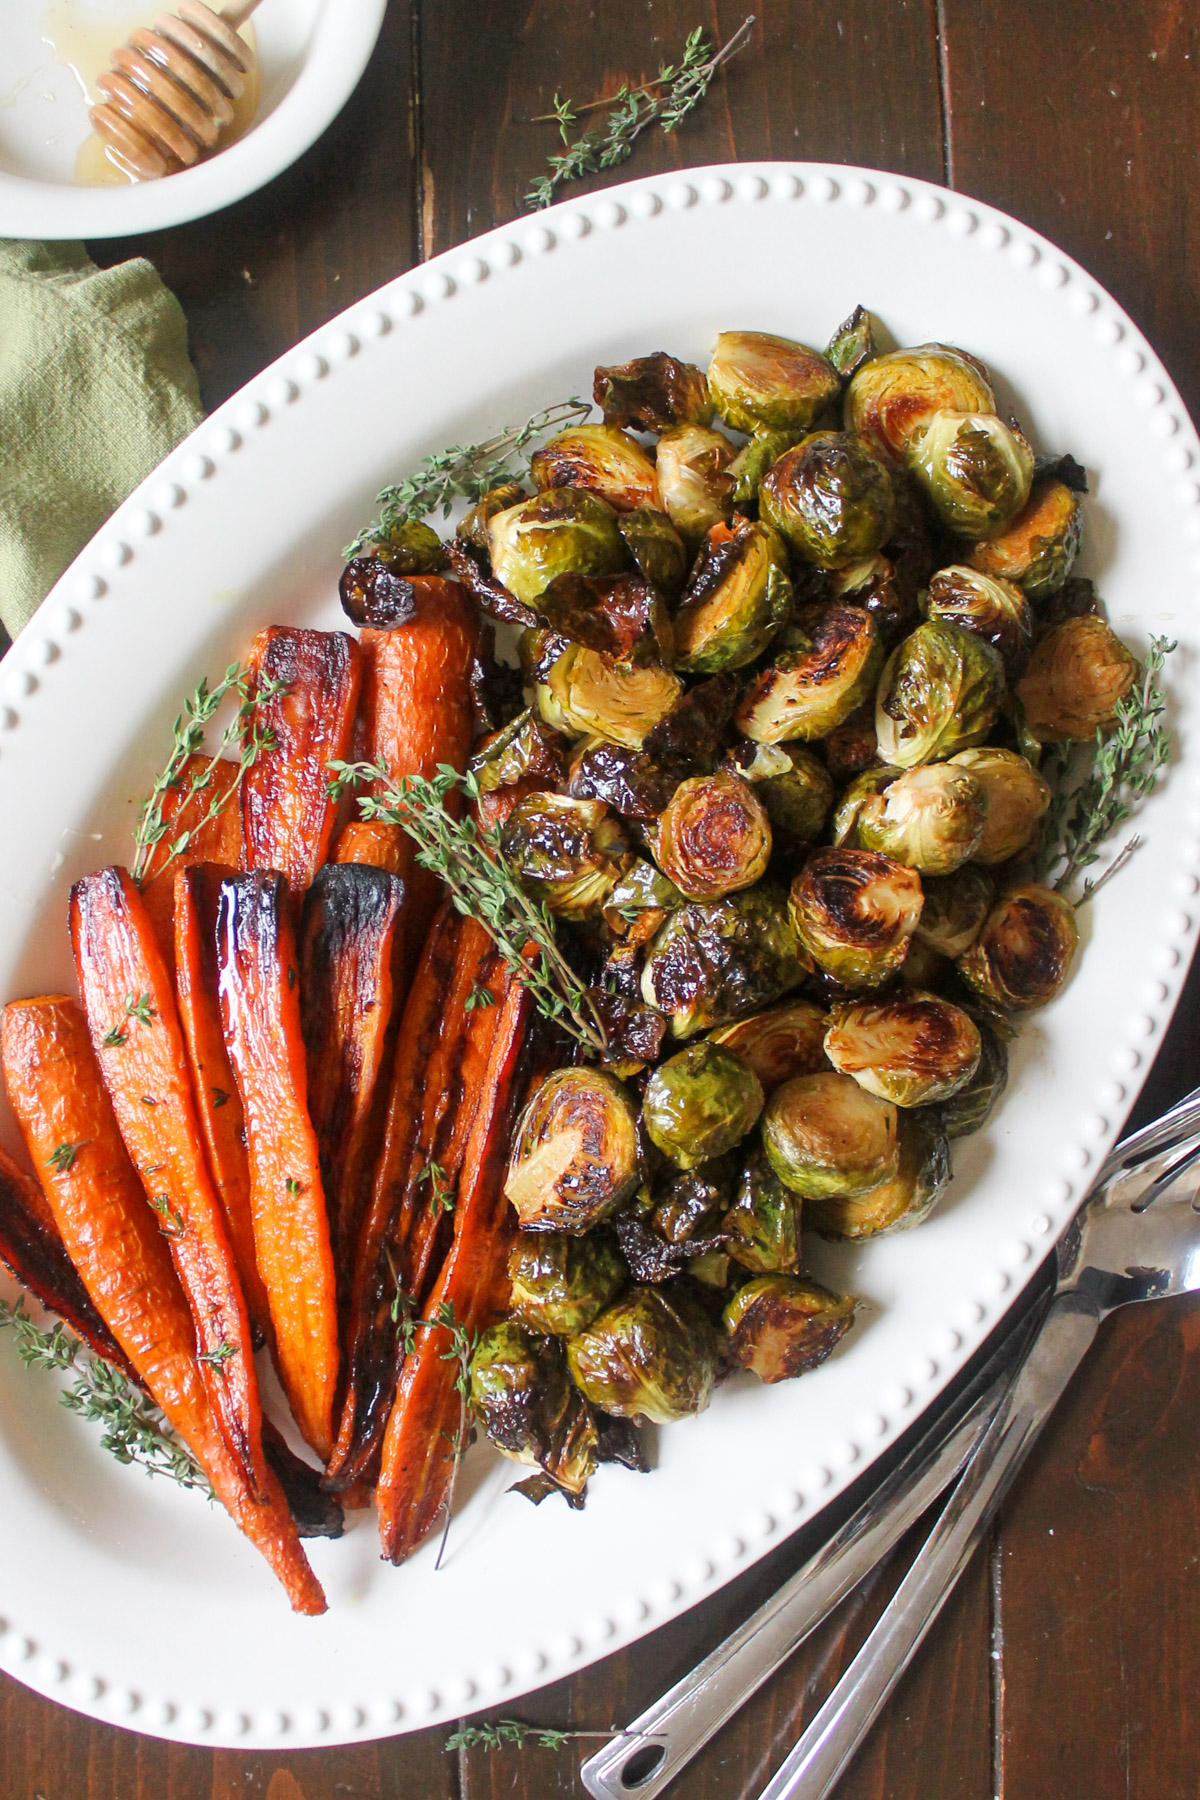 A large party platter side dish of roasted Brussel sprouts and carrots with fresh thyme.